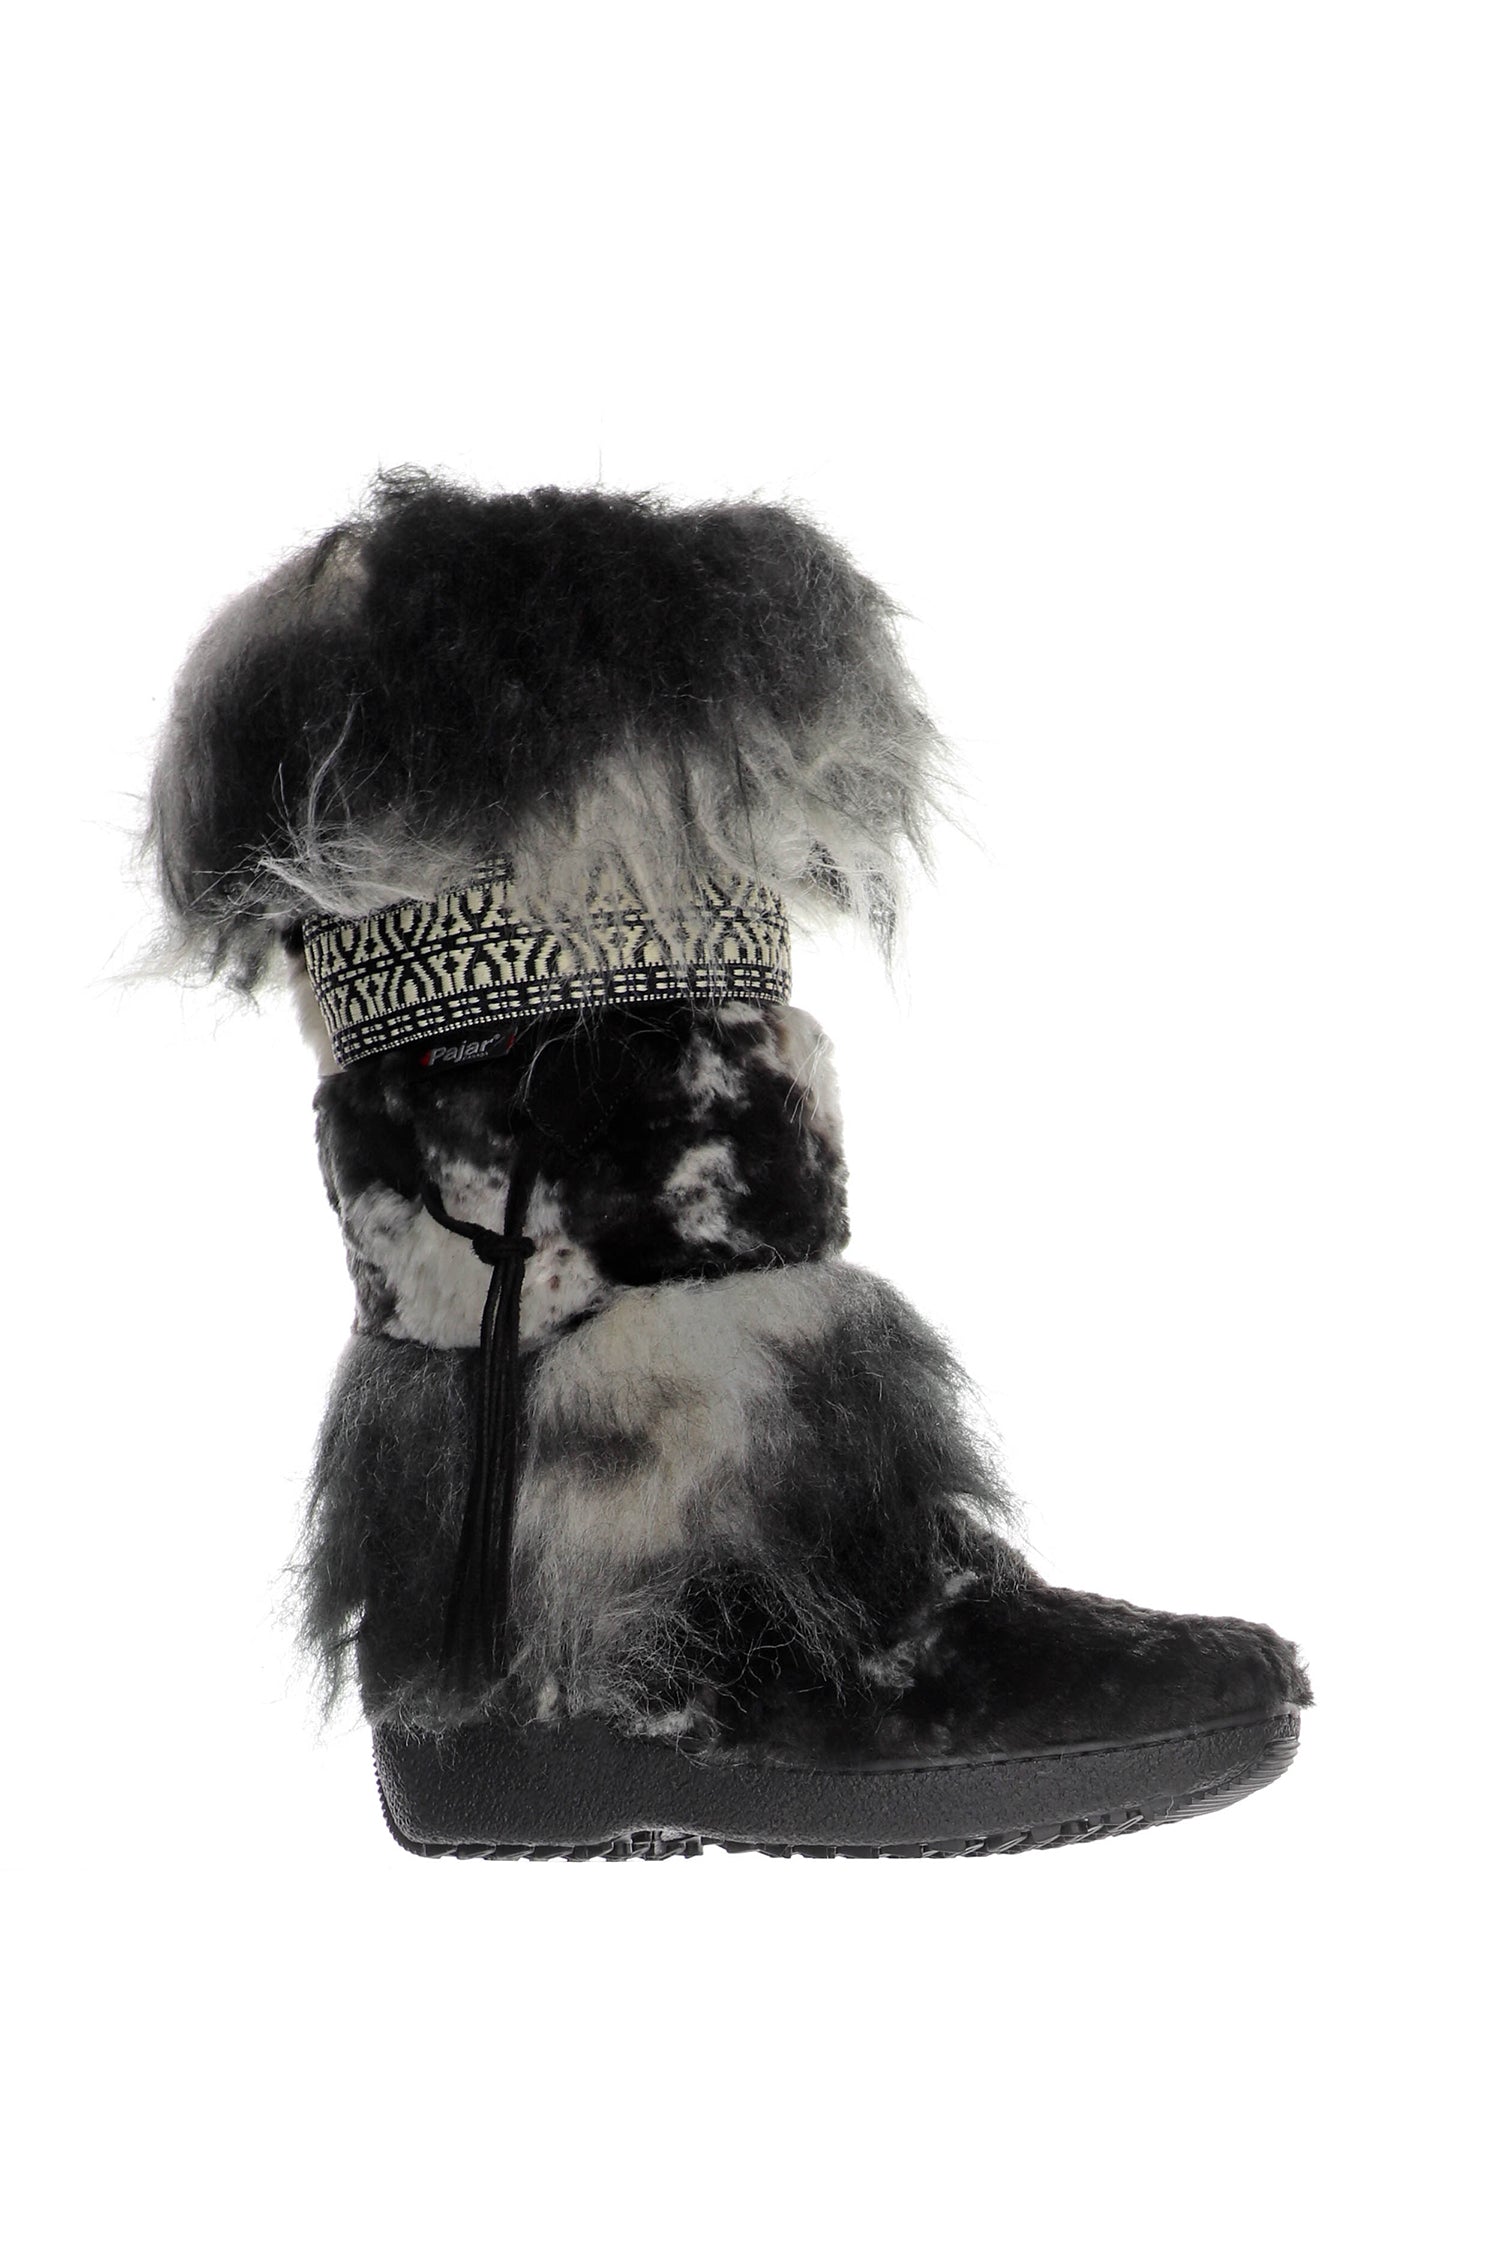 Anna Sui x Pajar Folklore Boot, black and grey furry boots, high sole, black lace to tied, long flurry top